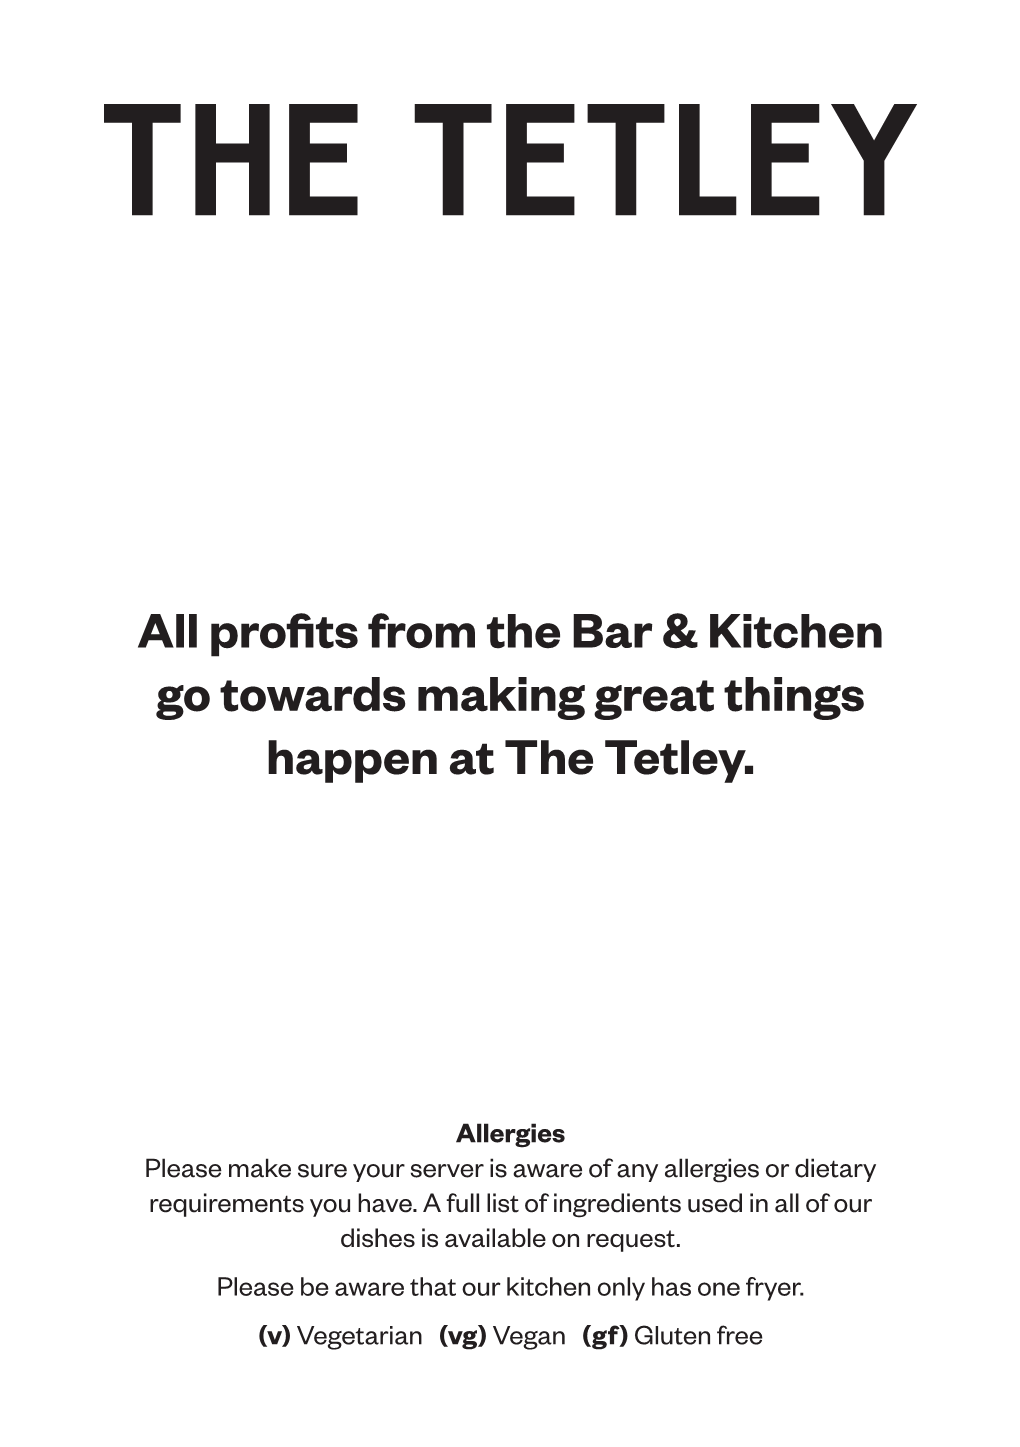 All Profits from the Bar & Kitchen Go Towards Making Great Things Happen at the Tetley